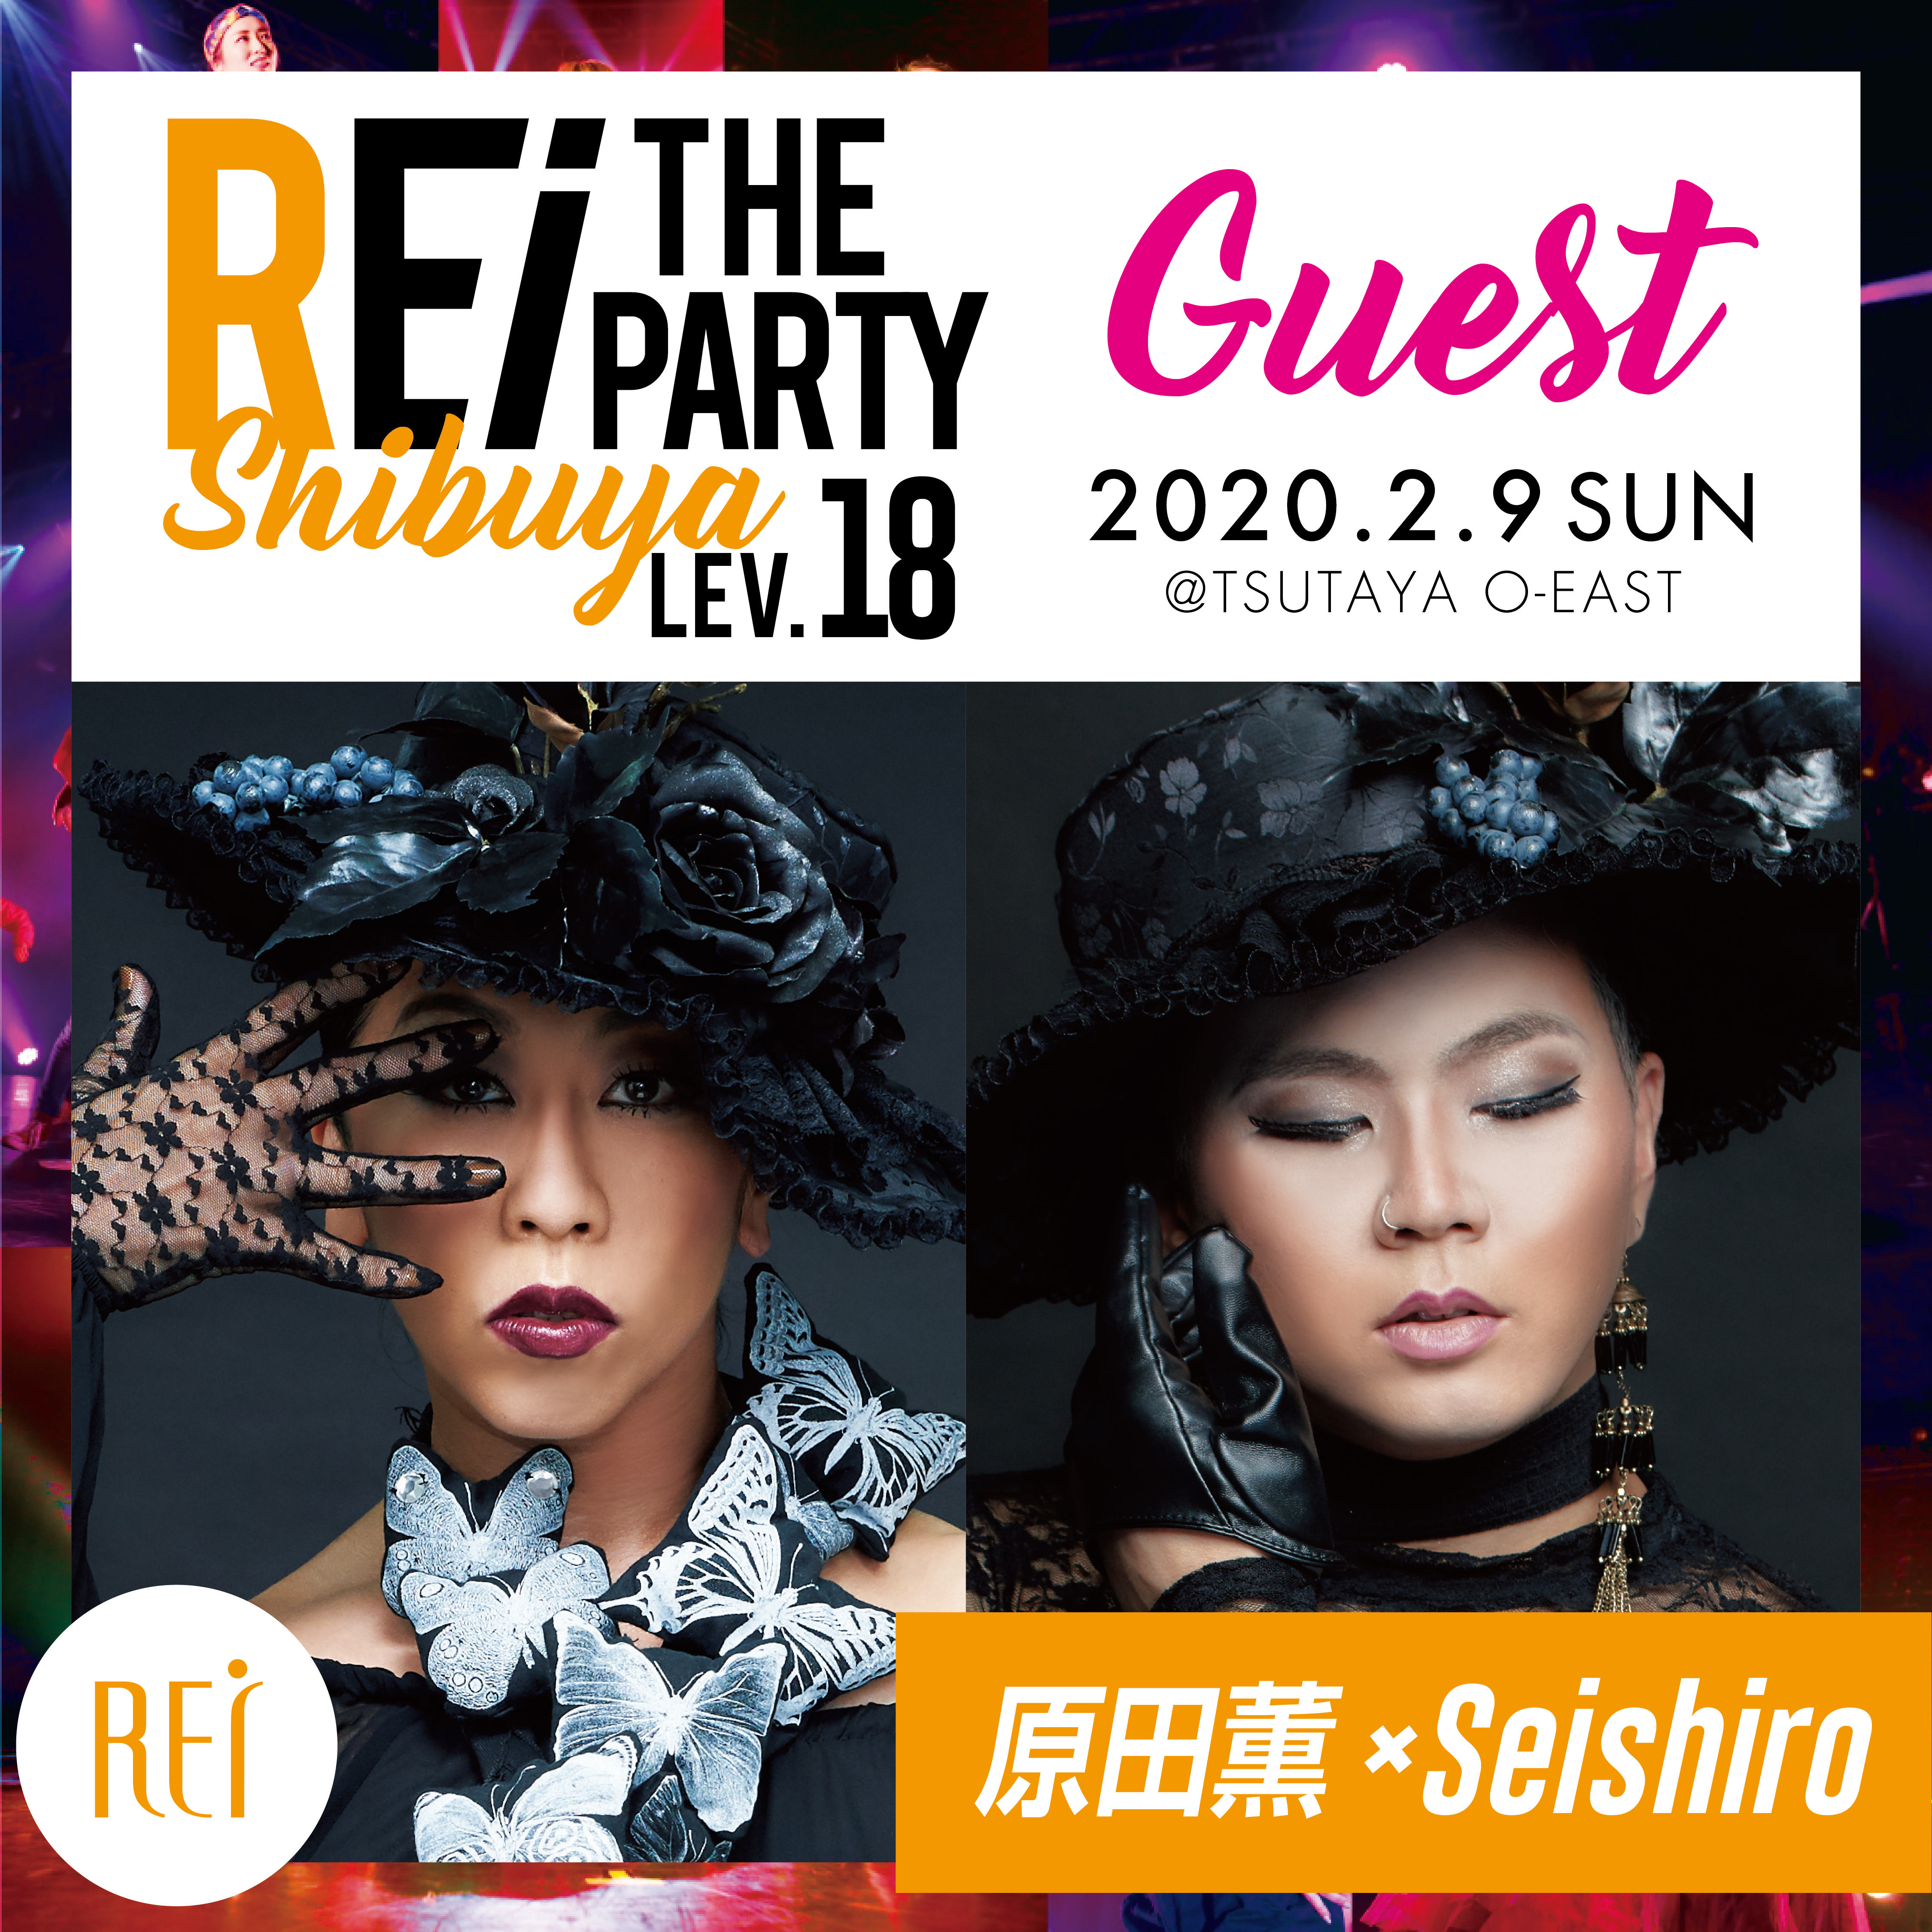 Rei The Party通称 ‘‘レイパ’’ まもなく開催！豪華ゲスト出演決定！！